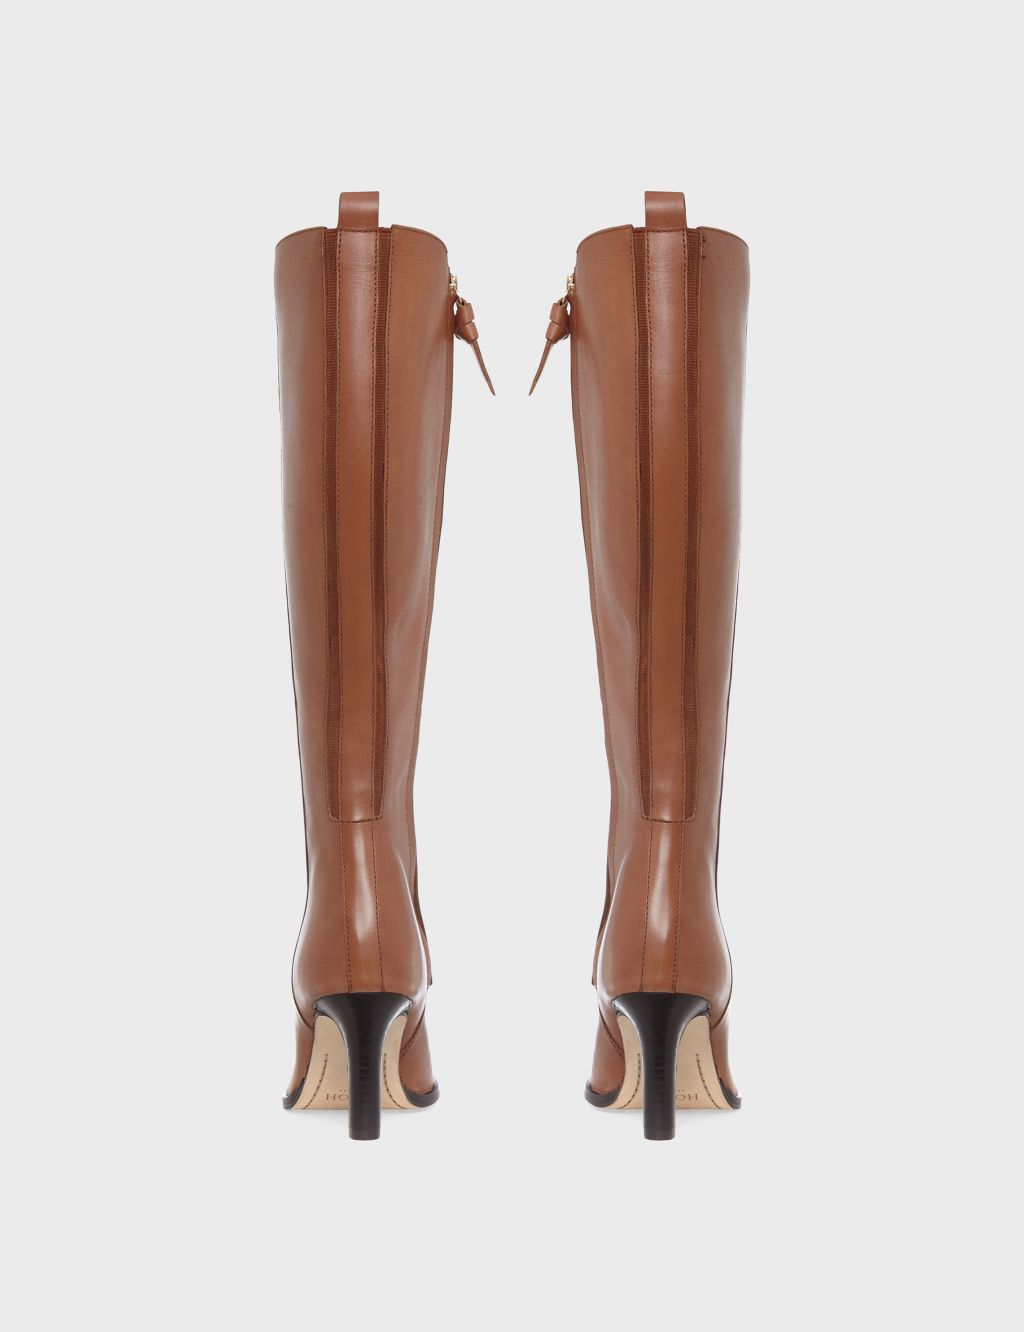 Leather Stiletto Heel Knee High Boots image 3